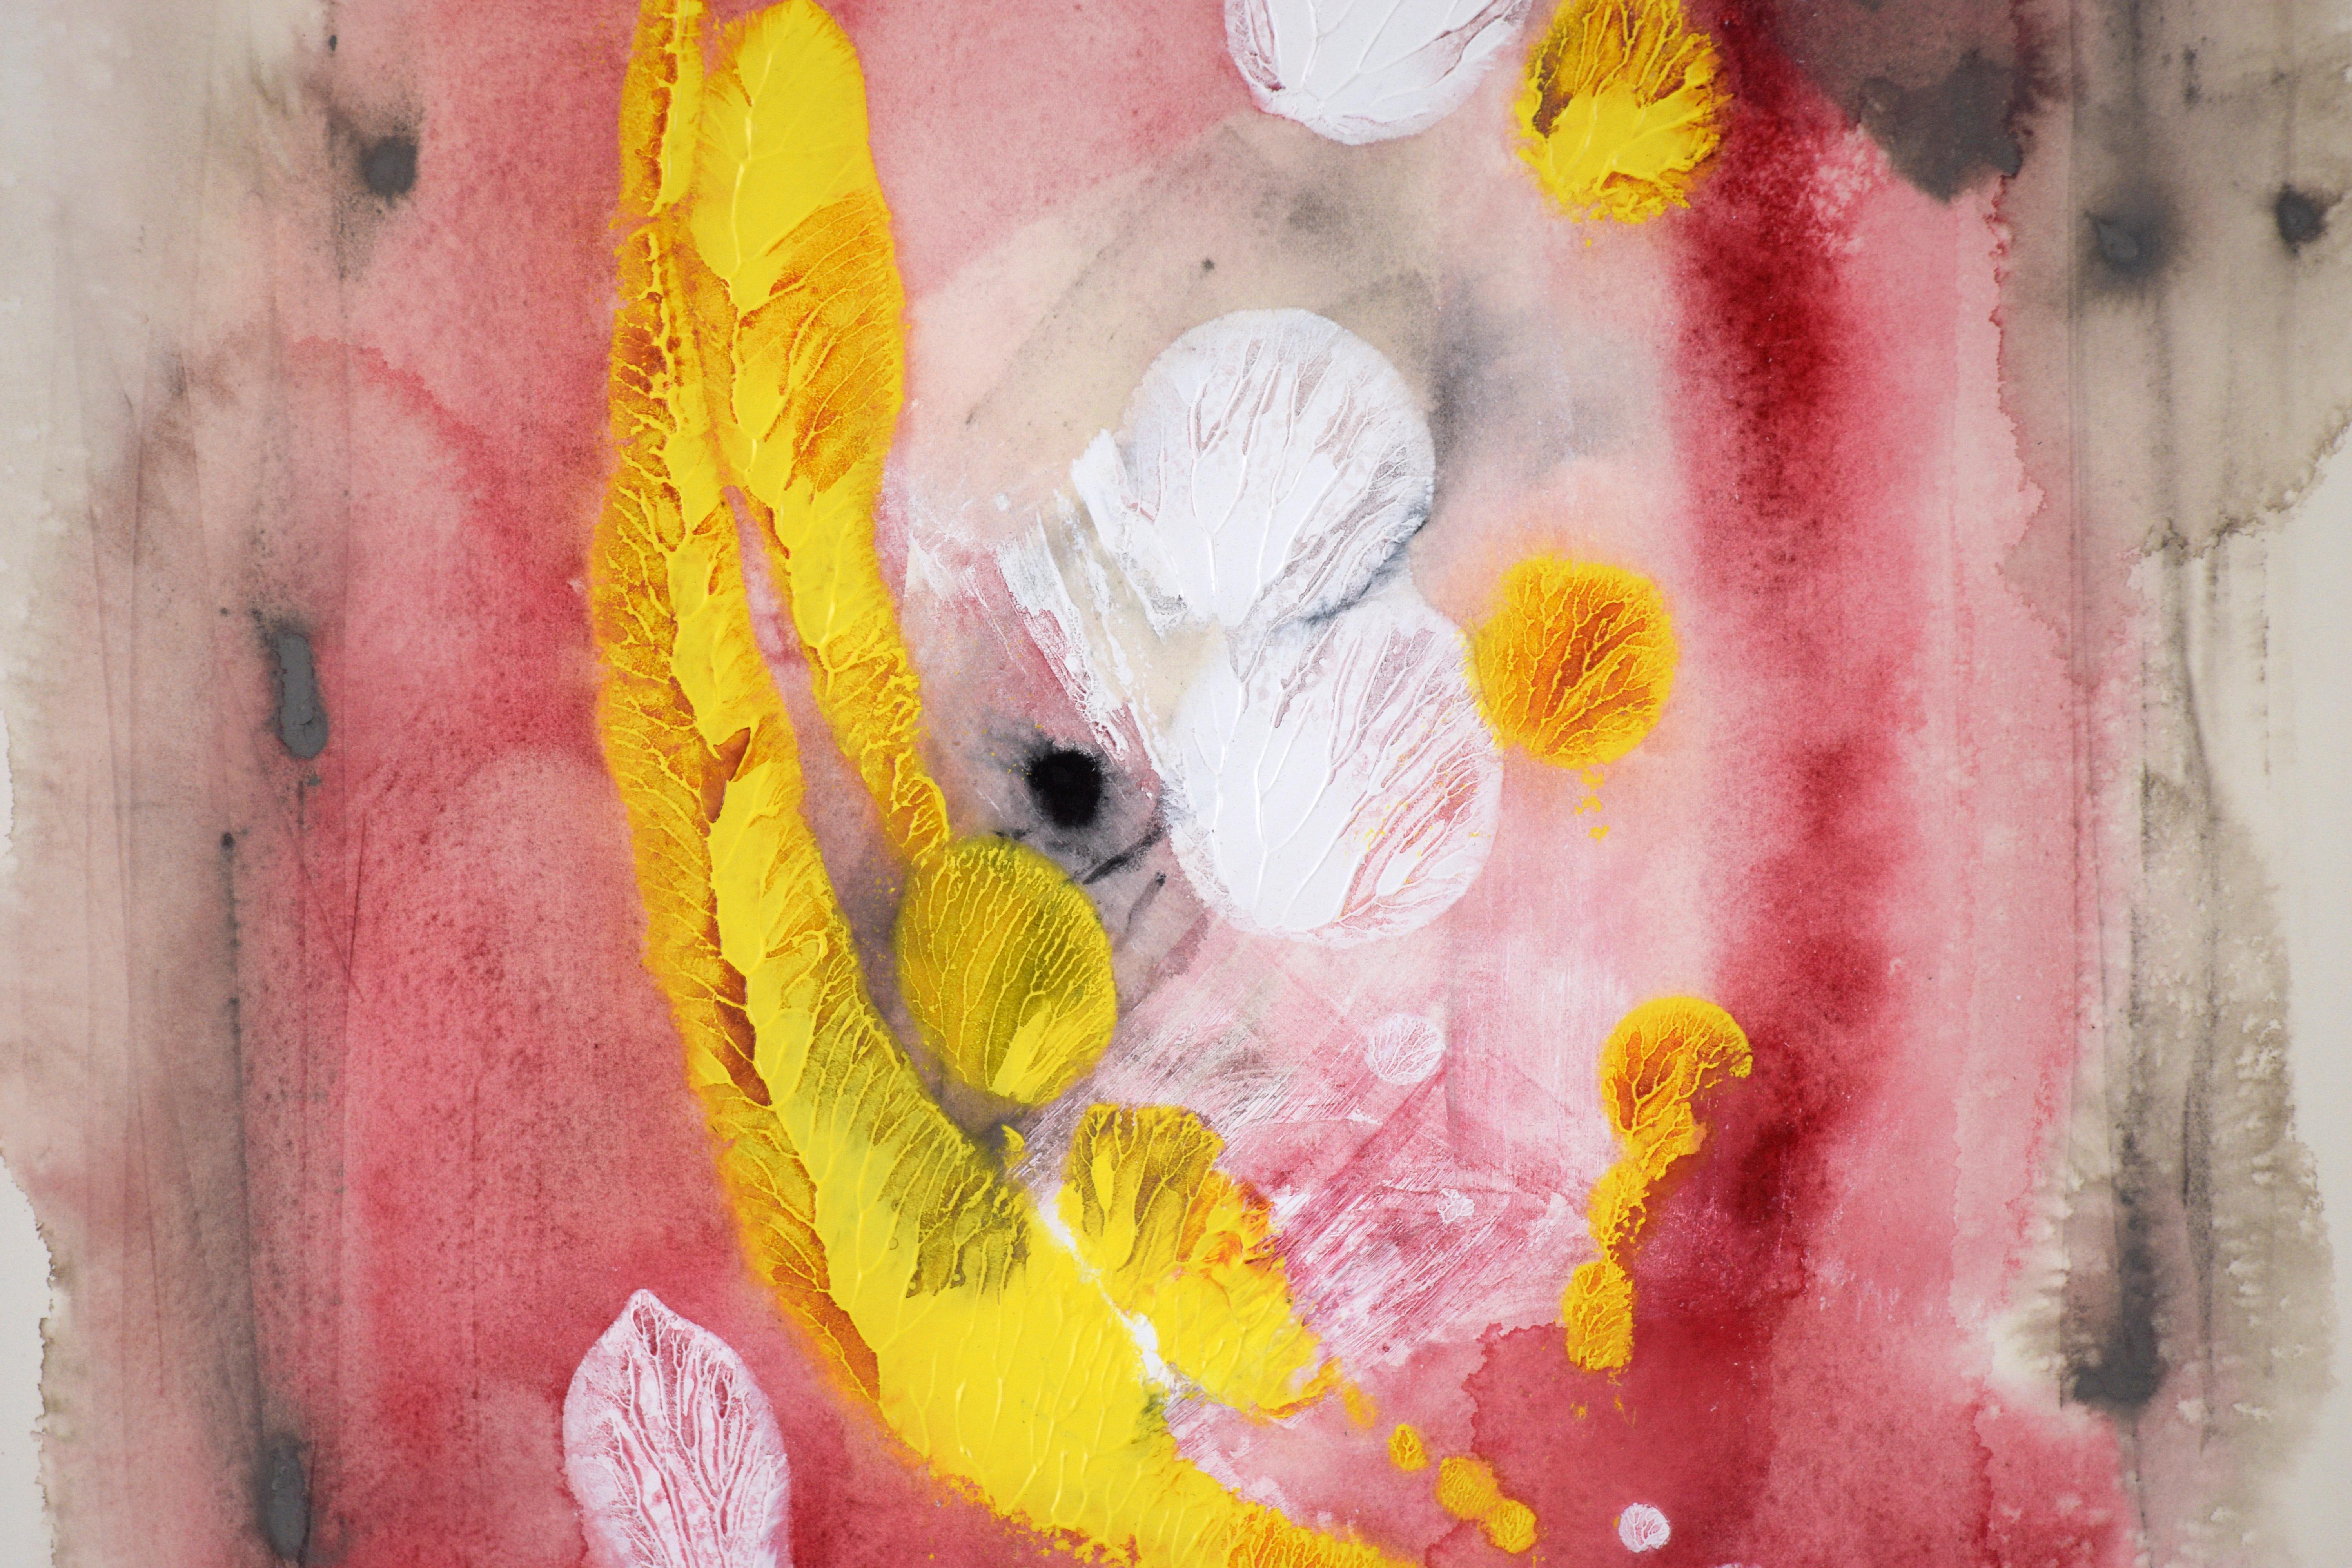 Falling Feathers in Yellow and White Abstract Expressionist in Acrylic on Paper

A bright abstract painting by California-based artist, Ricardo de Silva (American/Brazil, 20th C). Shapes resembling feathers are created out of thick paint pressed